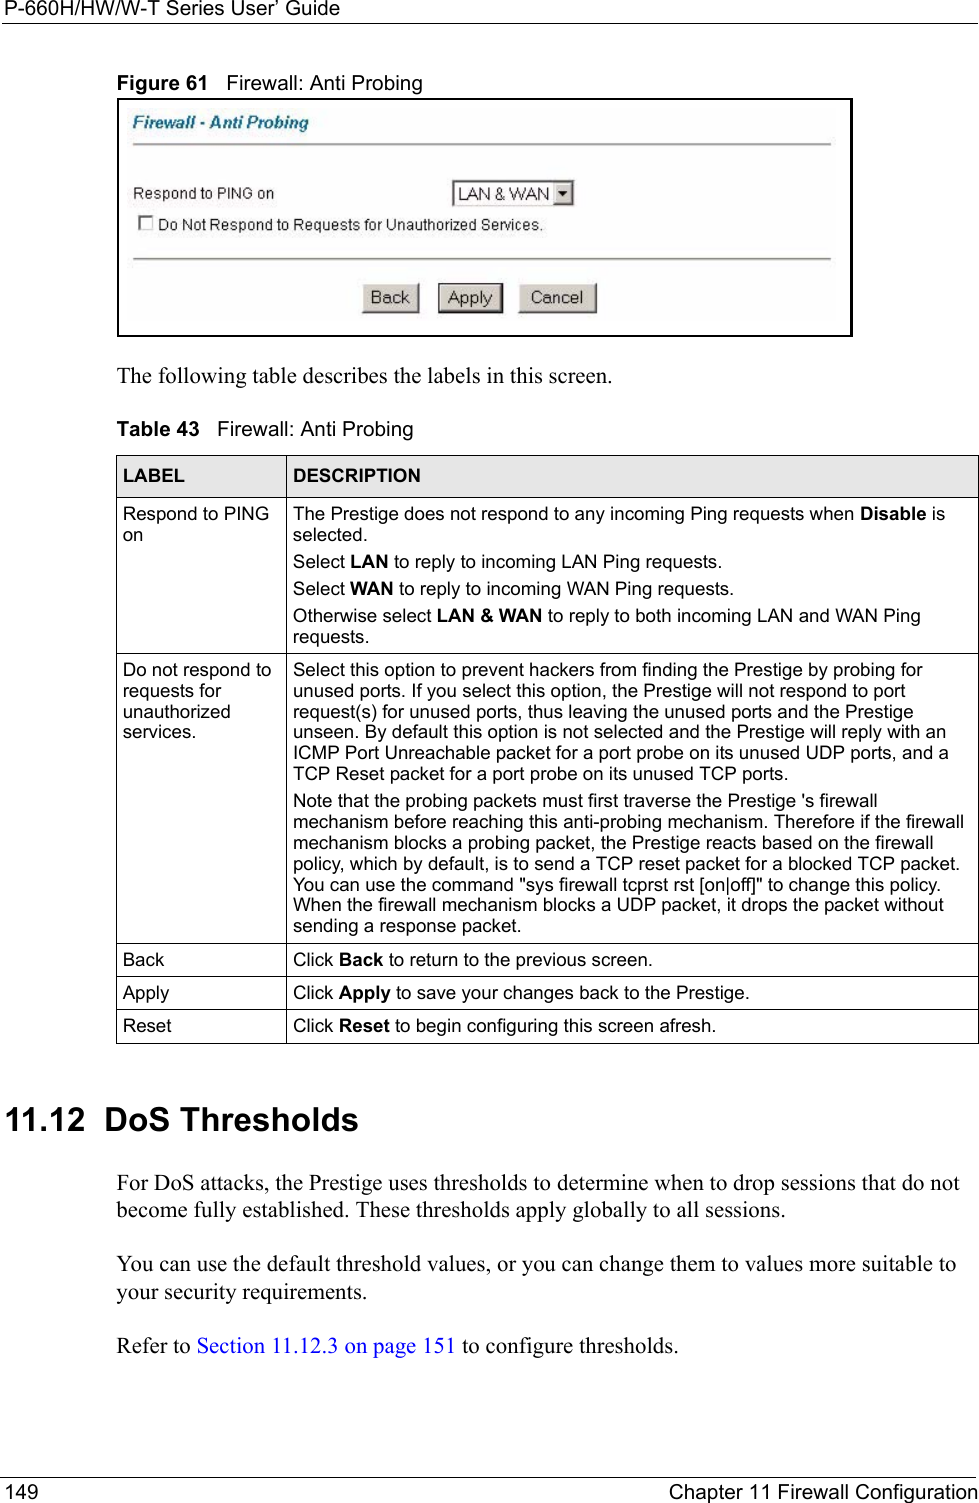 P-660H/HW/W-T Series User’ Guide149 Chapter 11 Firewall ConfigurationFigure 61   Firewall: Anti ProbingThe following table describes the labels in this screen.11.12  DoS Thresholds For DoS attacks, the Prestige uses thresholds to determine when to drop sessions that do not become fully established. These thresholds apply globally to all sessions.You can use the default threshold values, or you can change them to values more suitable to your security requirements.Refer to Section 11.12.3 on page 151 to configure thresholds.  Table 43   Firewall: Anti ProbingLABEL DESCRIPTIONRespond to PING onThe Prestige does not respond to any incoming Ping requests when Disable is selected. Select LAN to reply to incoming LAN Ping requests.Select WAN to reply to incoming WAN Ping requests. Otherwise select LAN &amp; WAN to reply to both incoming LAN and WAN Ping requests. Do not respond to requests for unauthorized services.Select this option to prevent hackers from finding the Prestige by probing for unused ports. If you select this option, the Prestige will not respond to port request(s) for unused ports, thus leaving the unused ports and the Prestige unseen. By default this option is not selected and the Prestige will reply with an ICMP Port Unreachable packet for a port probe on its unused UDP ports, and a TCP Reset packet for a port probe on its unused TCP ports. Note that the probing packets must first traverse the Prestige &apos;s firewall mechanism before reaching this anti-probing mechanism. Therefore if the firewall mechanism blocks a probing packet, the Prestige reacts based on the firewall policy, which by default, is to send a TCP reset packet for a blocked TCP packet. You can use the command &quot;sys firewall tcprst rst [on|off]&quot; to change this policy. When the firewall mechanism blocks a UDP packet, it drops the packet without sending a response packet.Back Click Back to return to the previous screen. Apply Click Apply to save your changes back to the Prestige.Reset Click Reset to begin configuring this screen afresh.